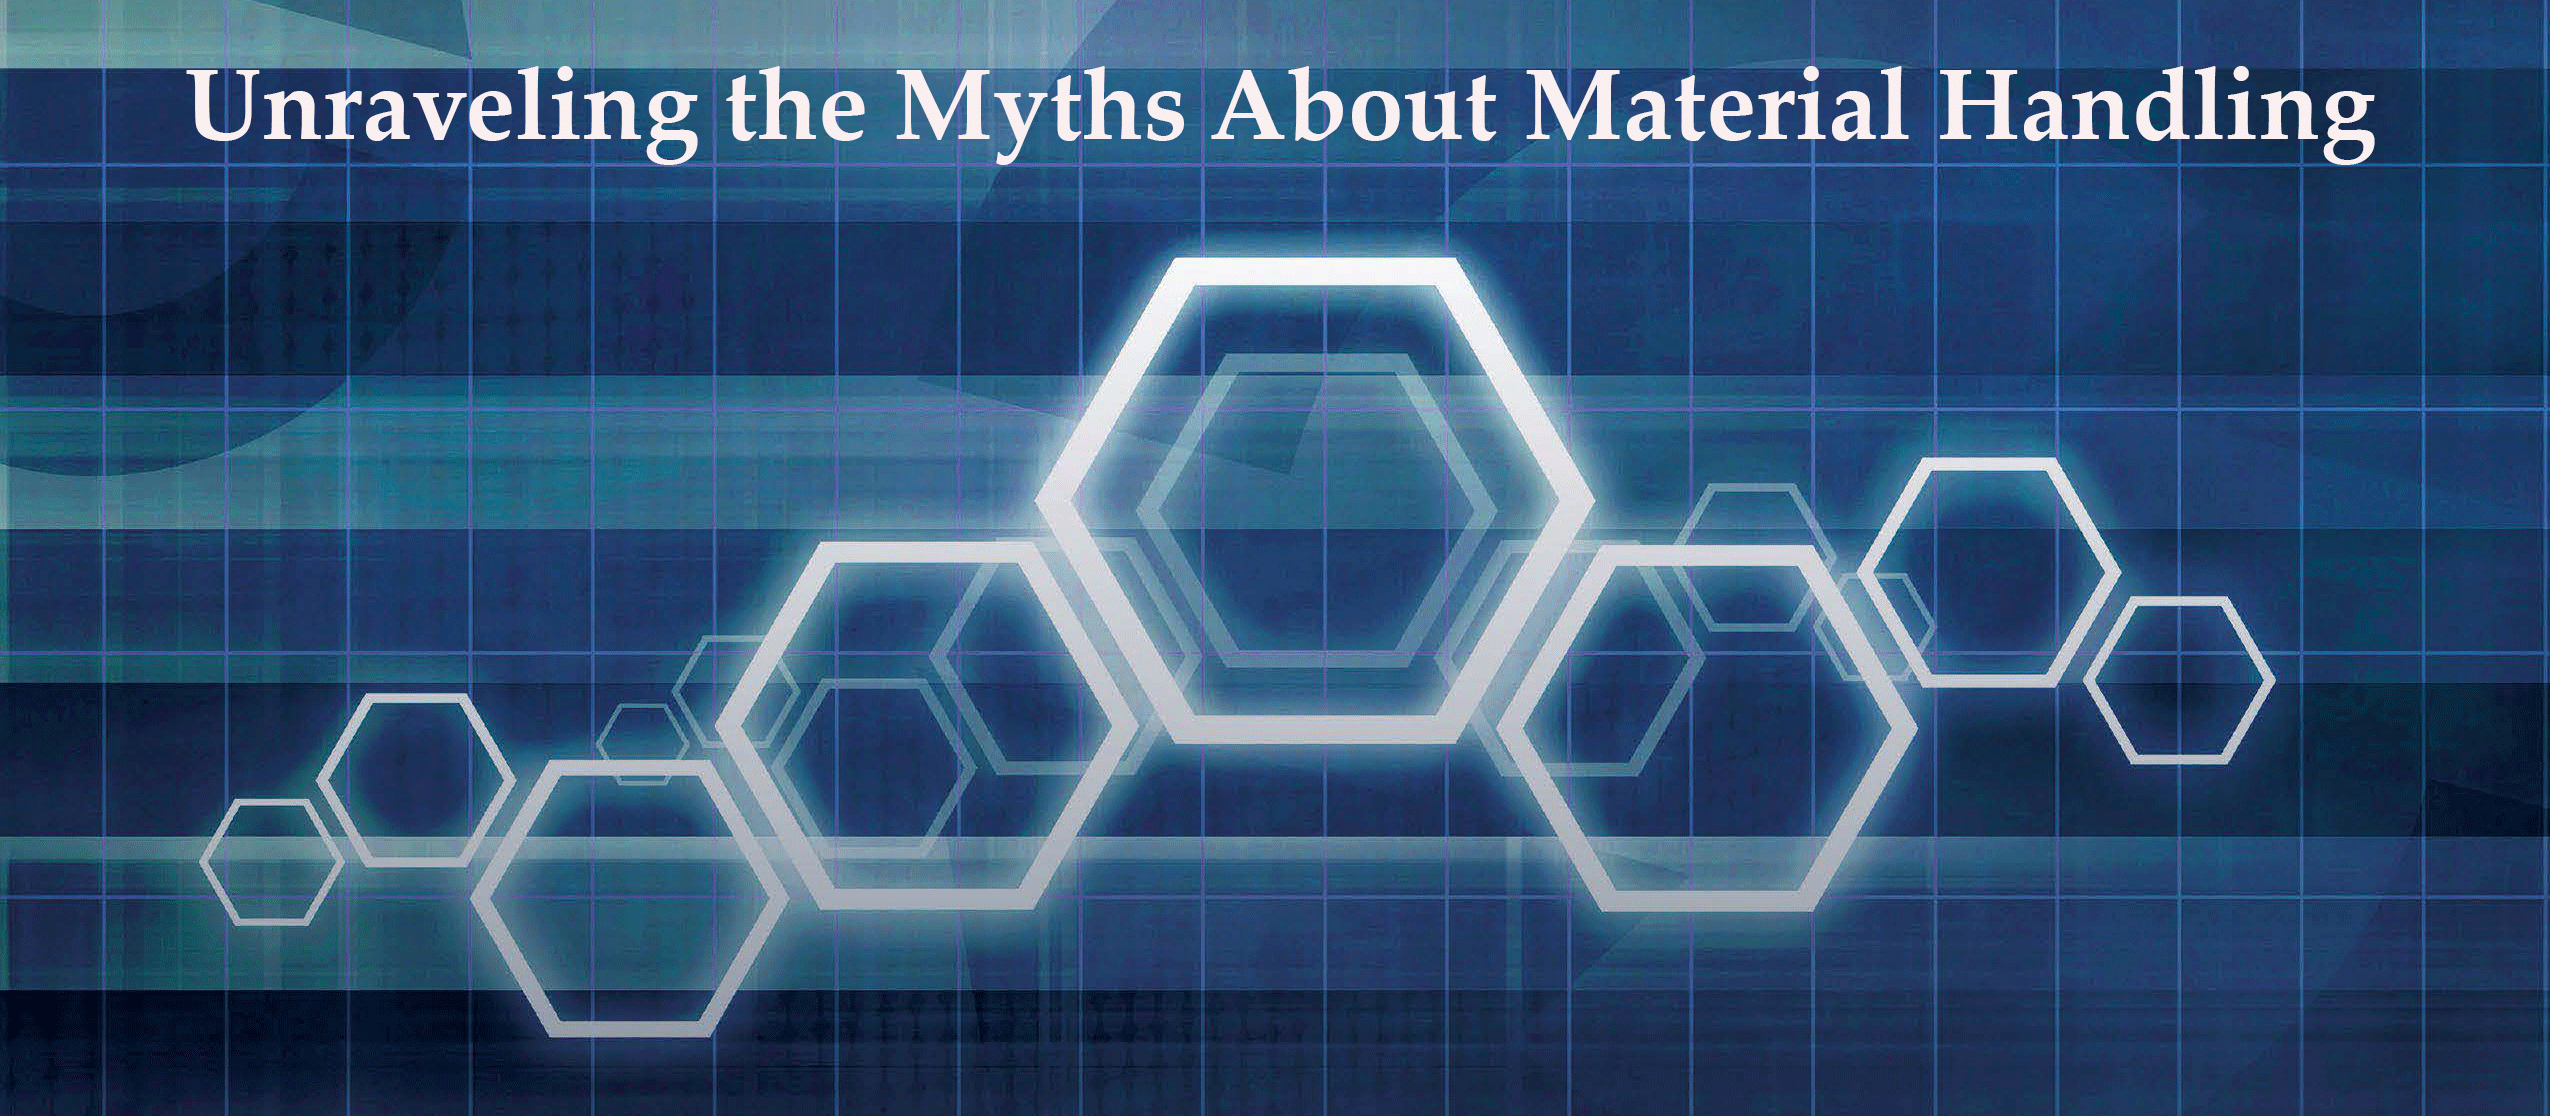 Unraveling the Myths about Material Handling